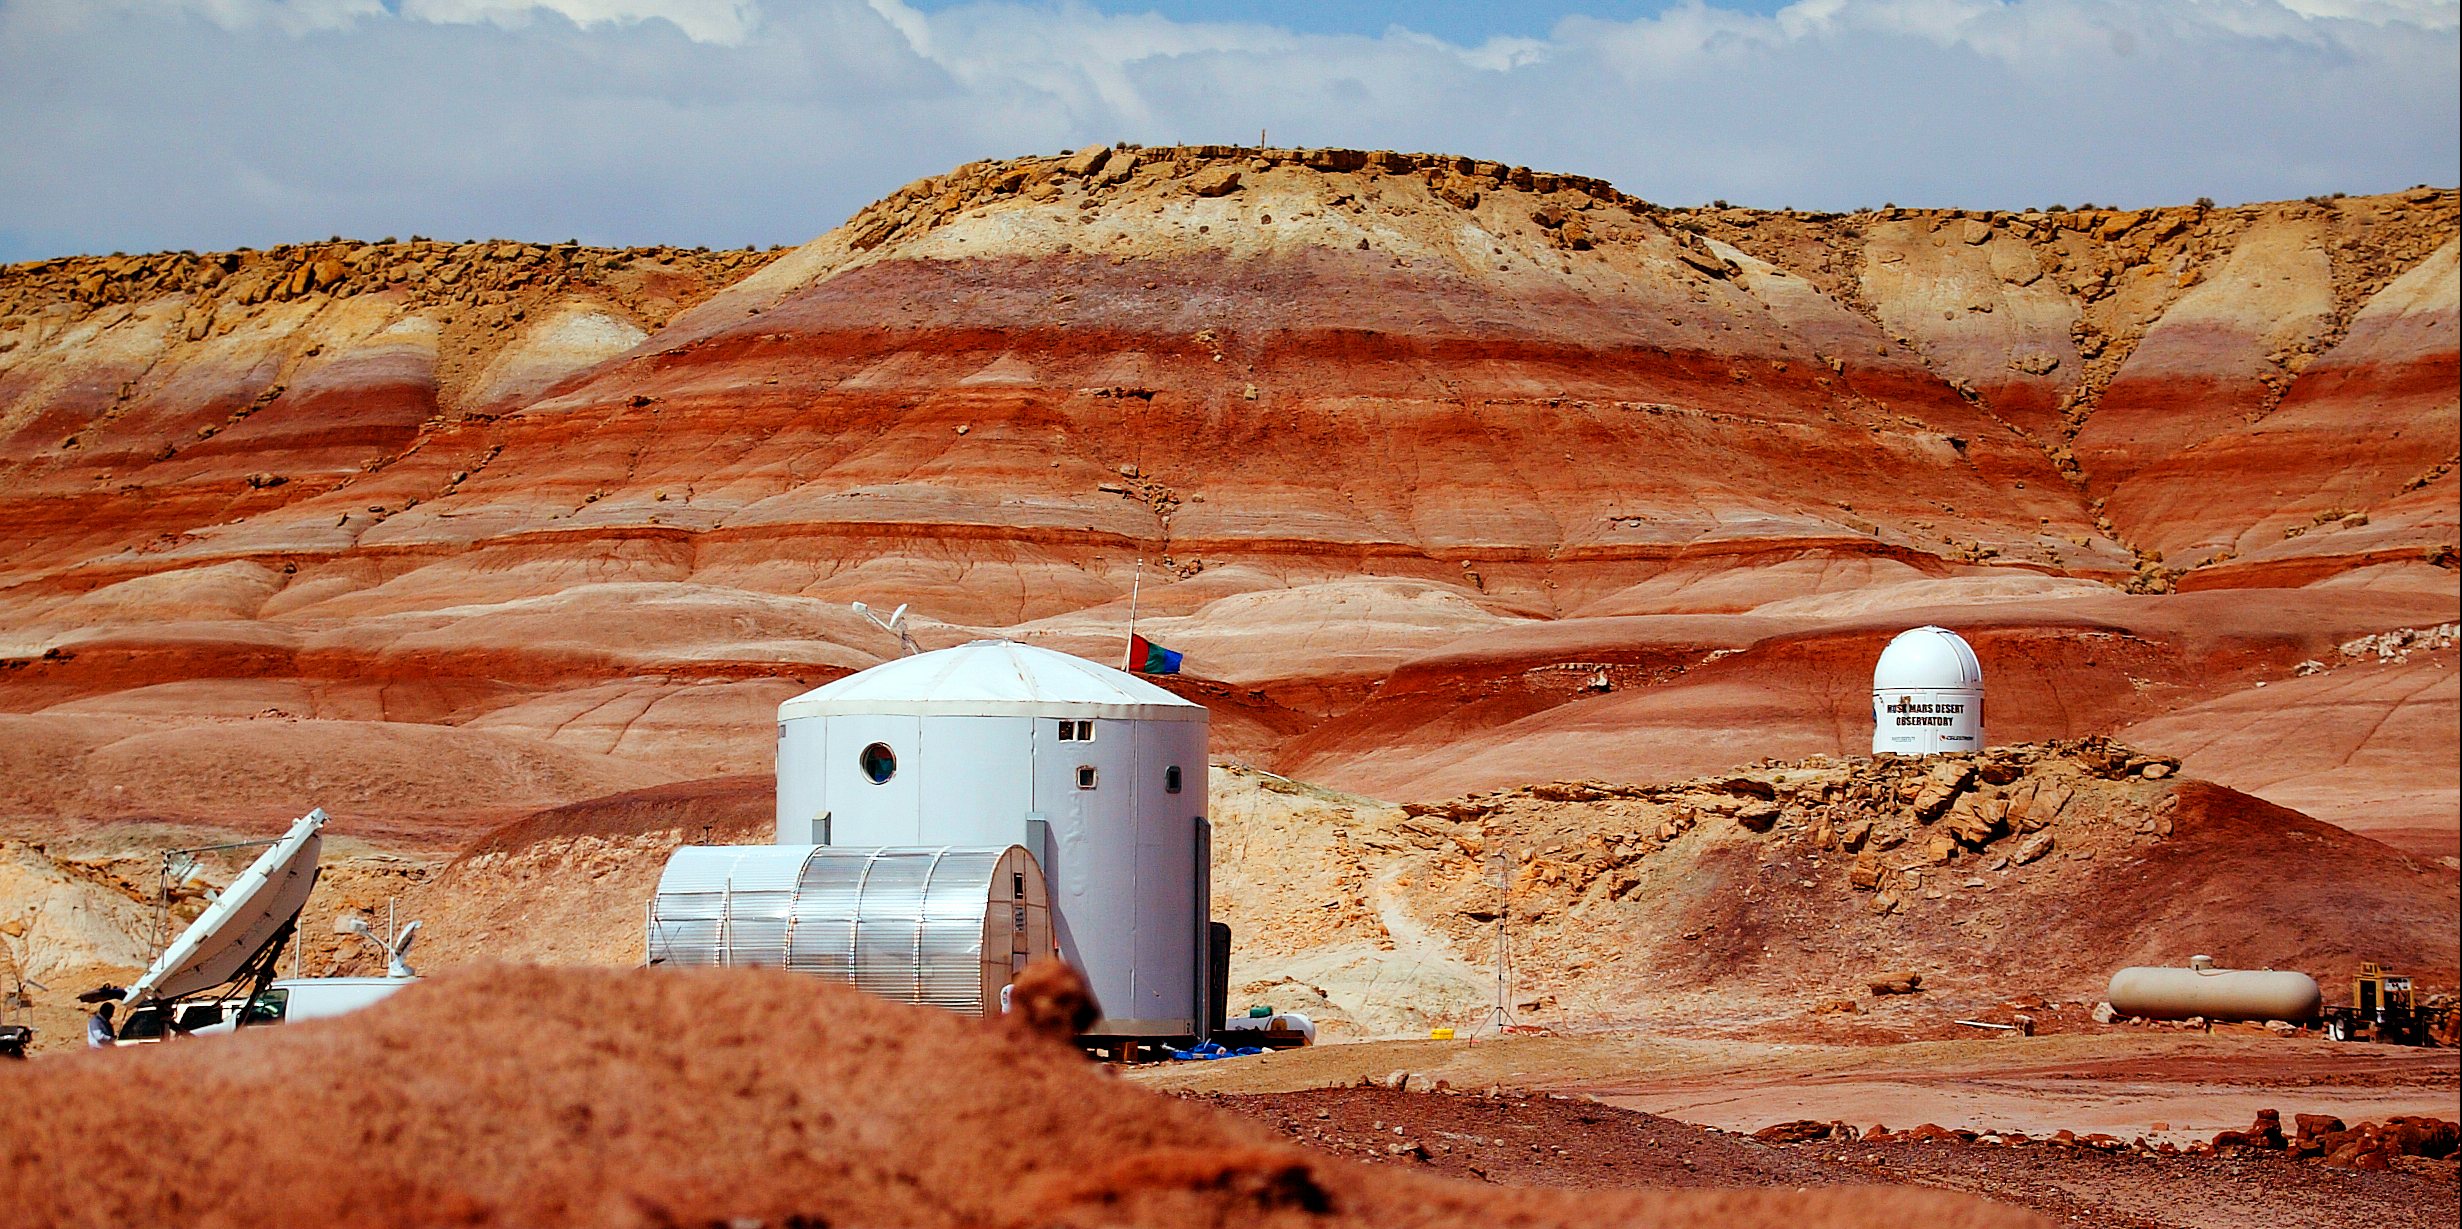 USA - Mars Research - Mars Society Desert Research Station